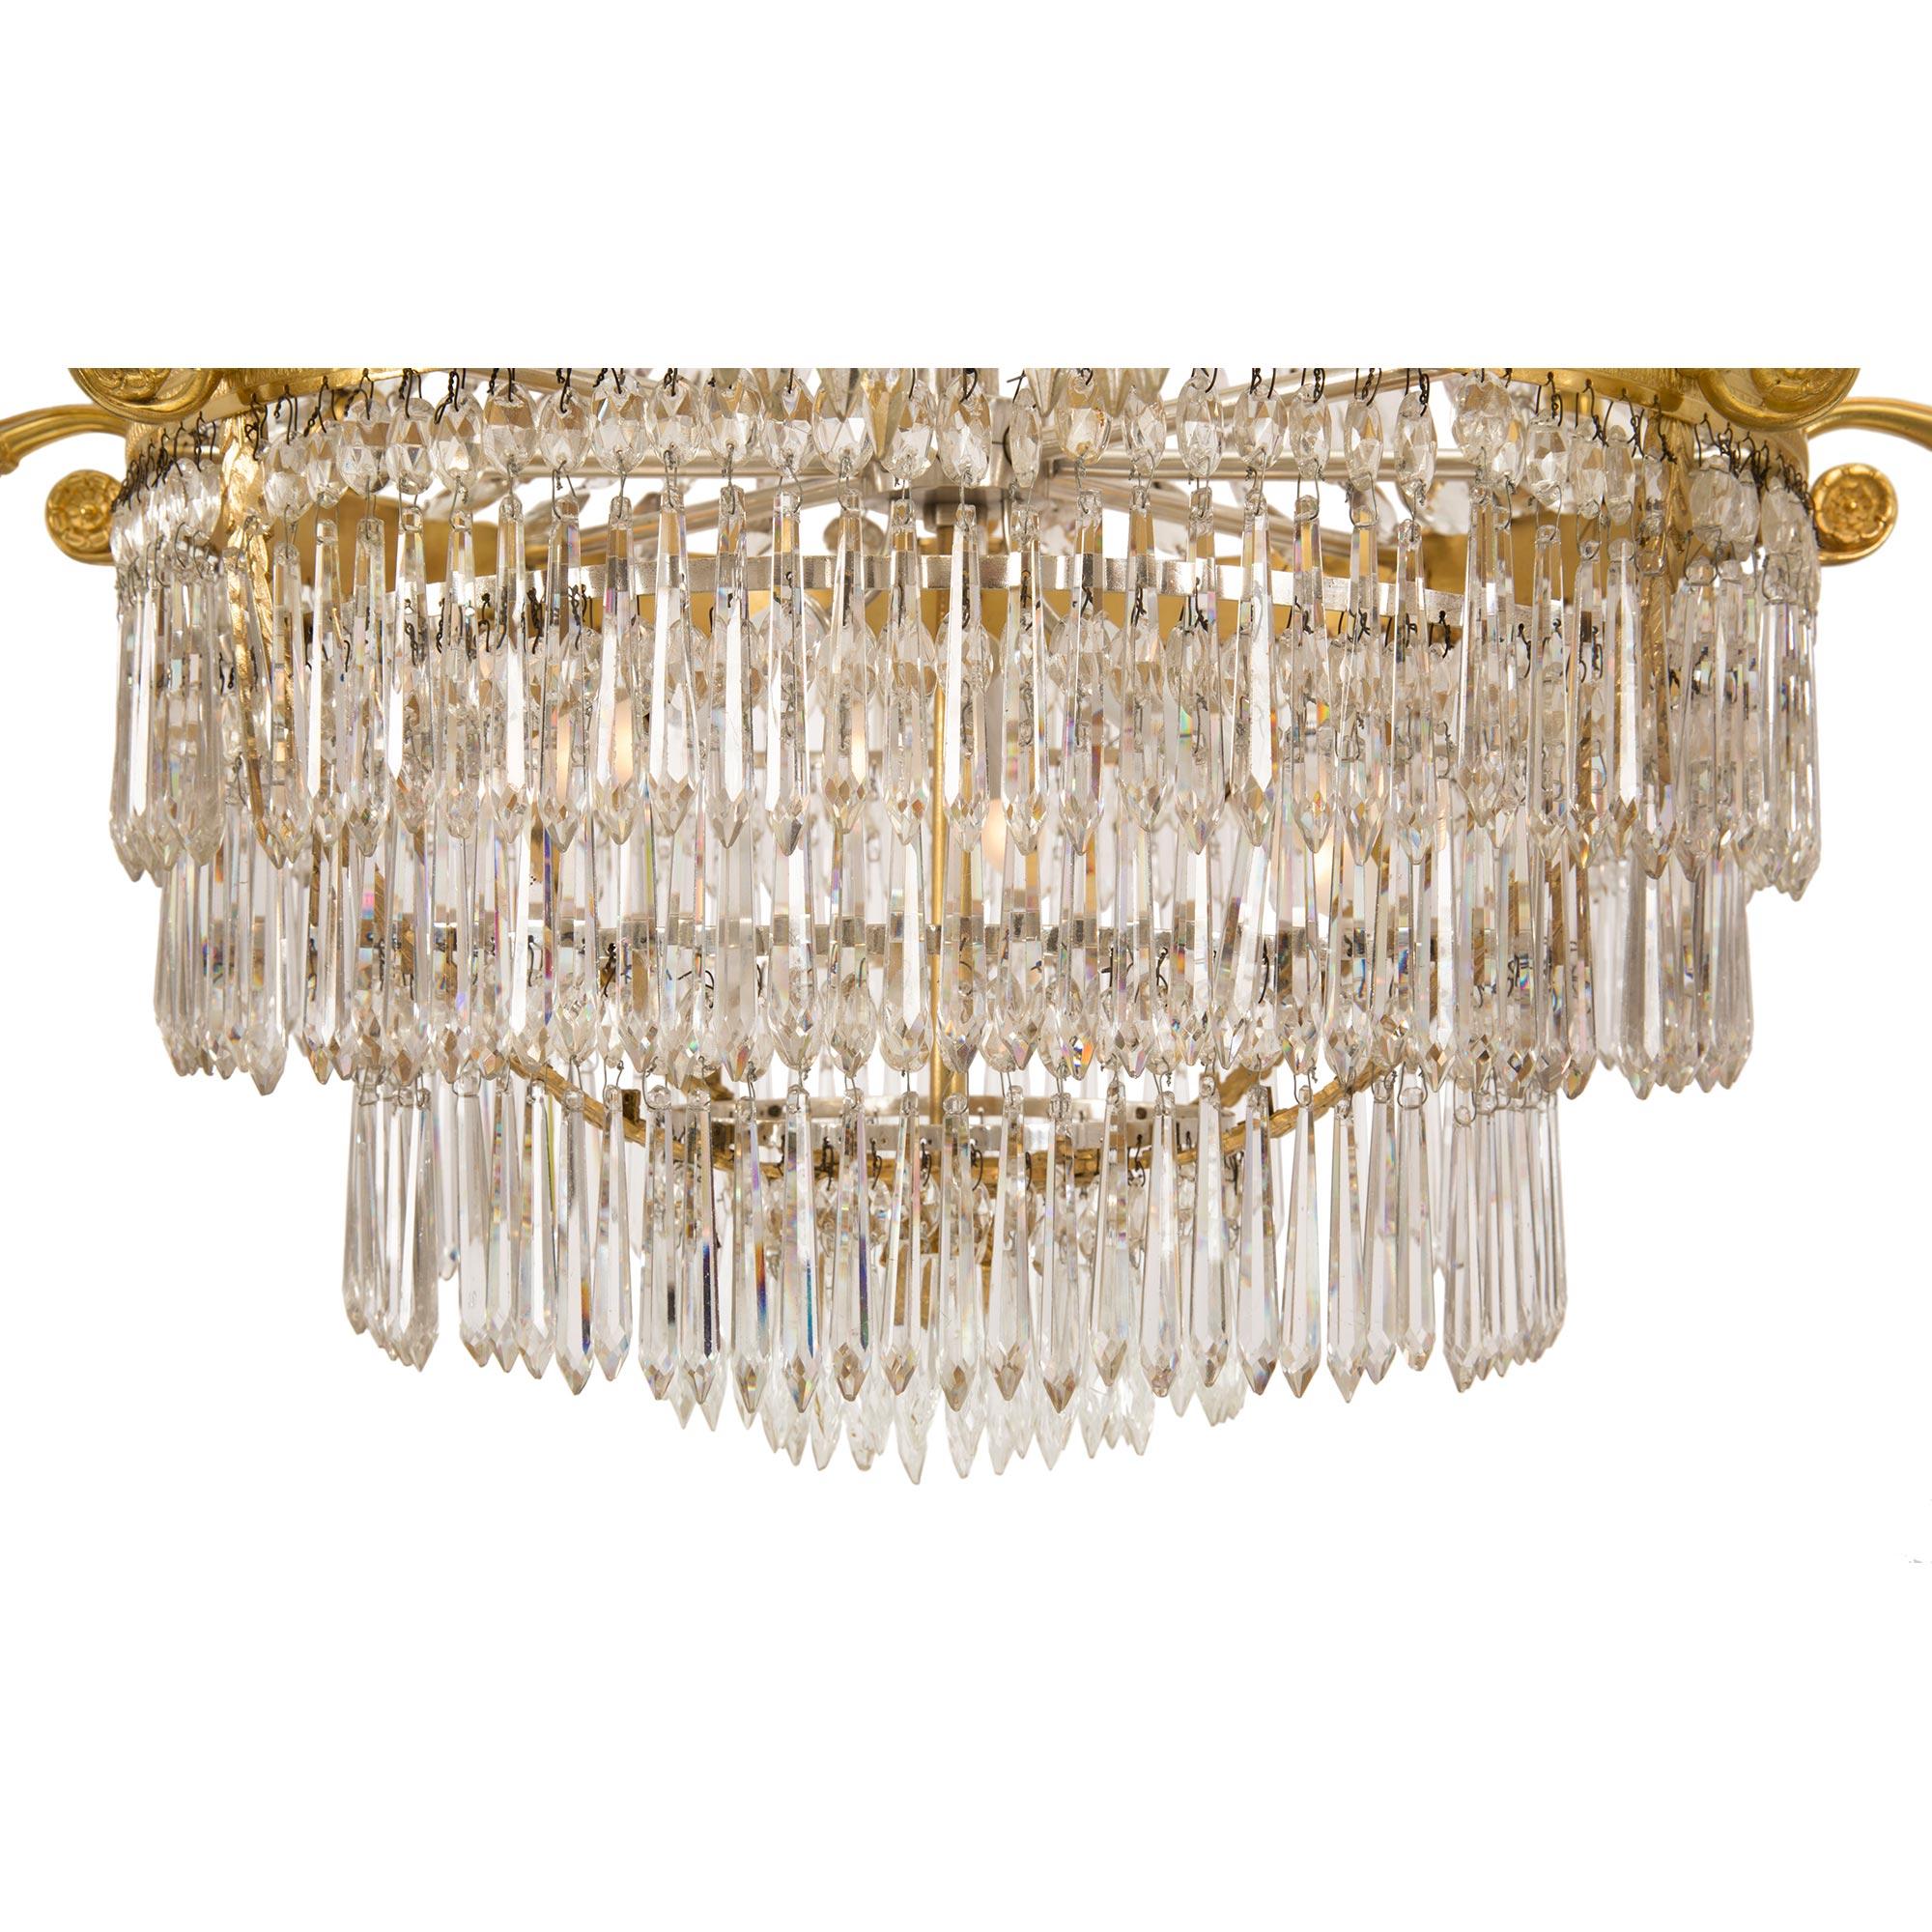 French 19th Century Neoclassical Style Ormolu and Baccarat Crystal Chandelier For Sale 4